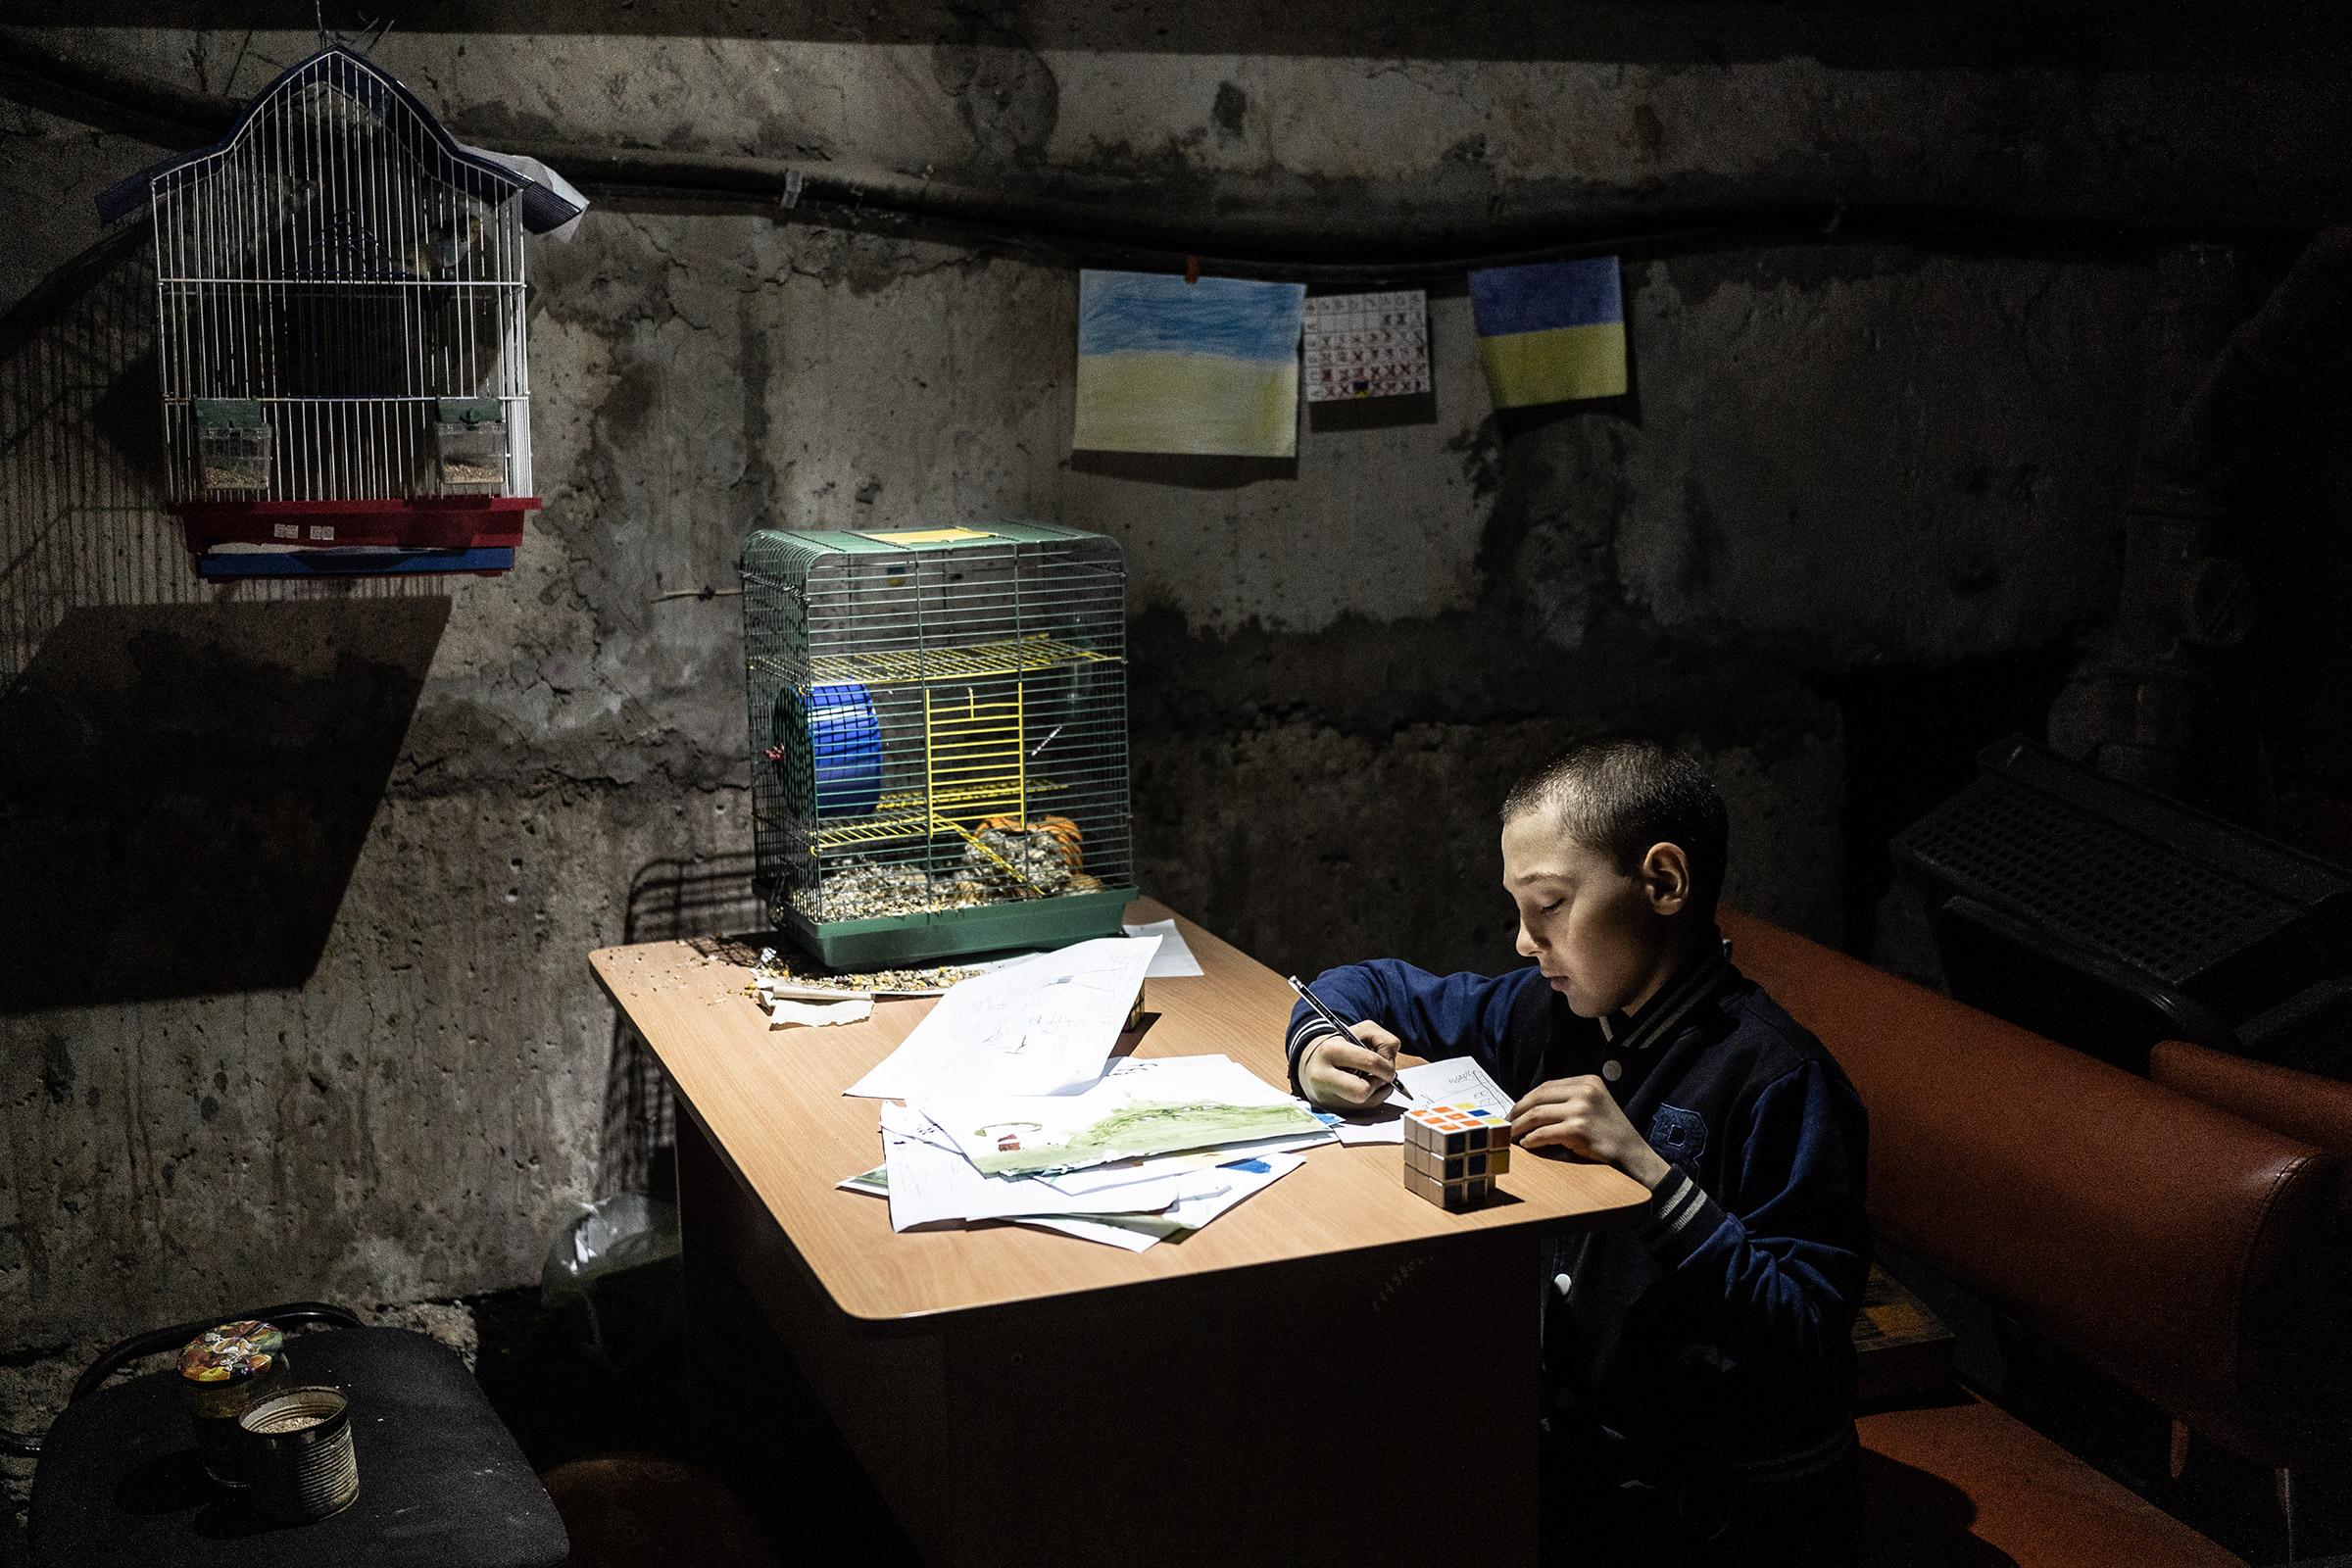 Tymophey, 8, paints in the basement of the kindergarten in Kutuzivka, Ukraine, on May 20, 2022. The village of Kutuzivka was occupied by Russia for weeks and liberated by the Ukrainian army on April 27, 2022. The village was heavily destroyed during fighting, and people are still living in basements in fear of future shelling. (Serhii Korovainyi)